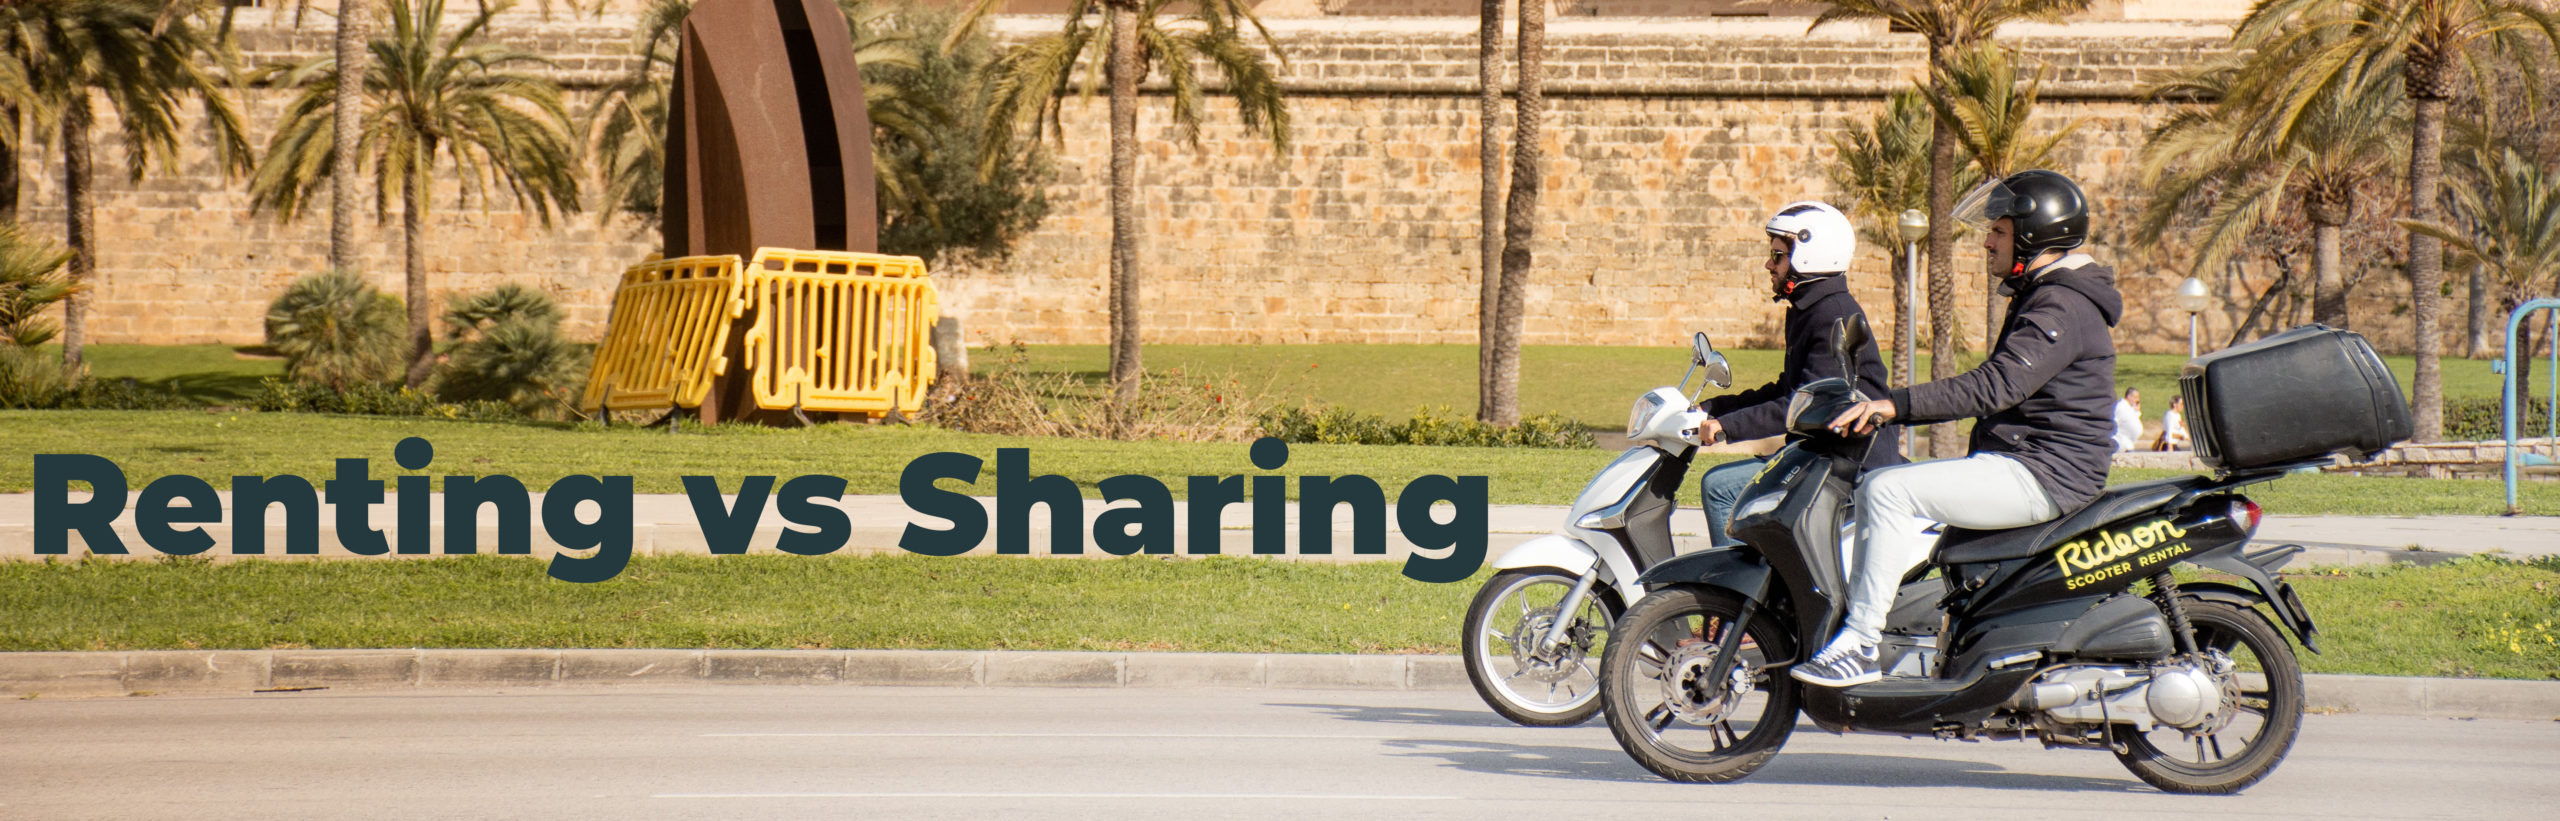 MOTORCYCLE RENTING VS MOTORCYCLE SHARING - Rent a Scooter in Barcelona